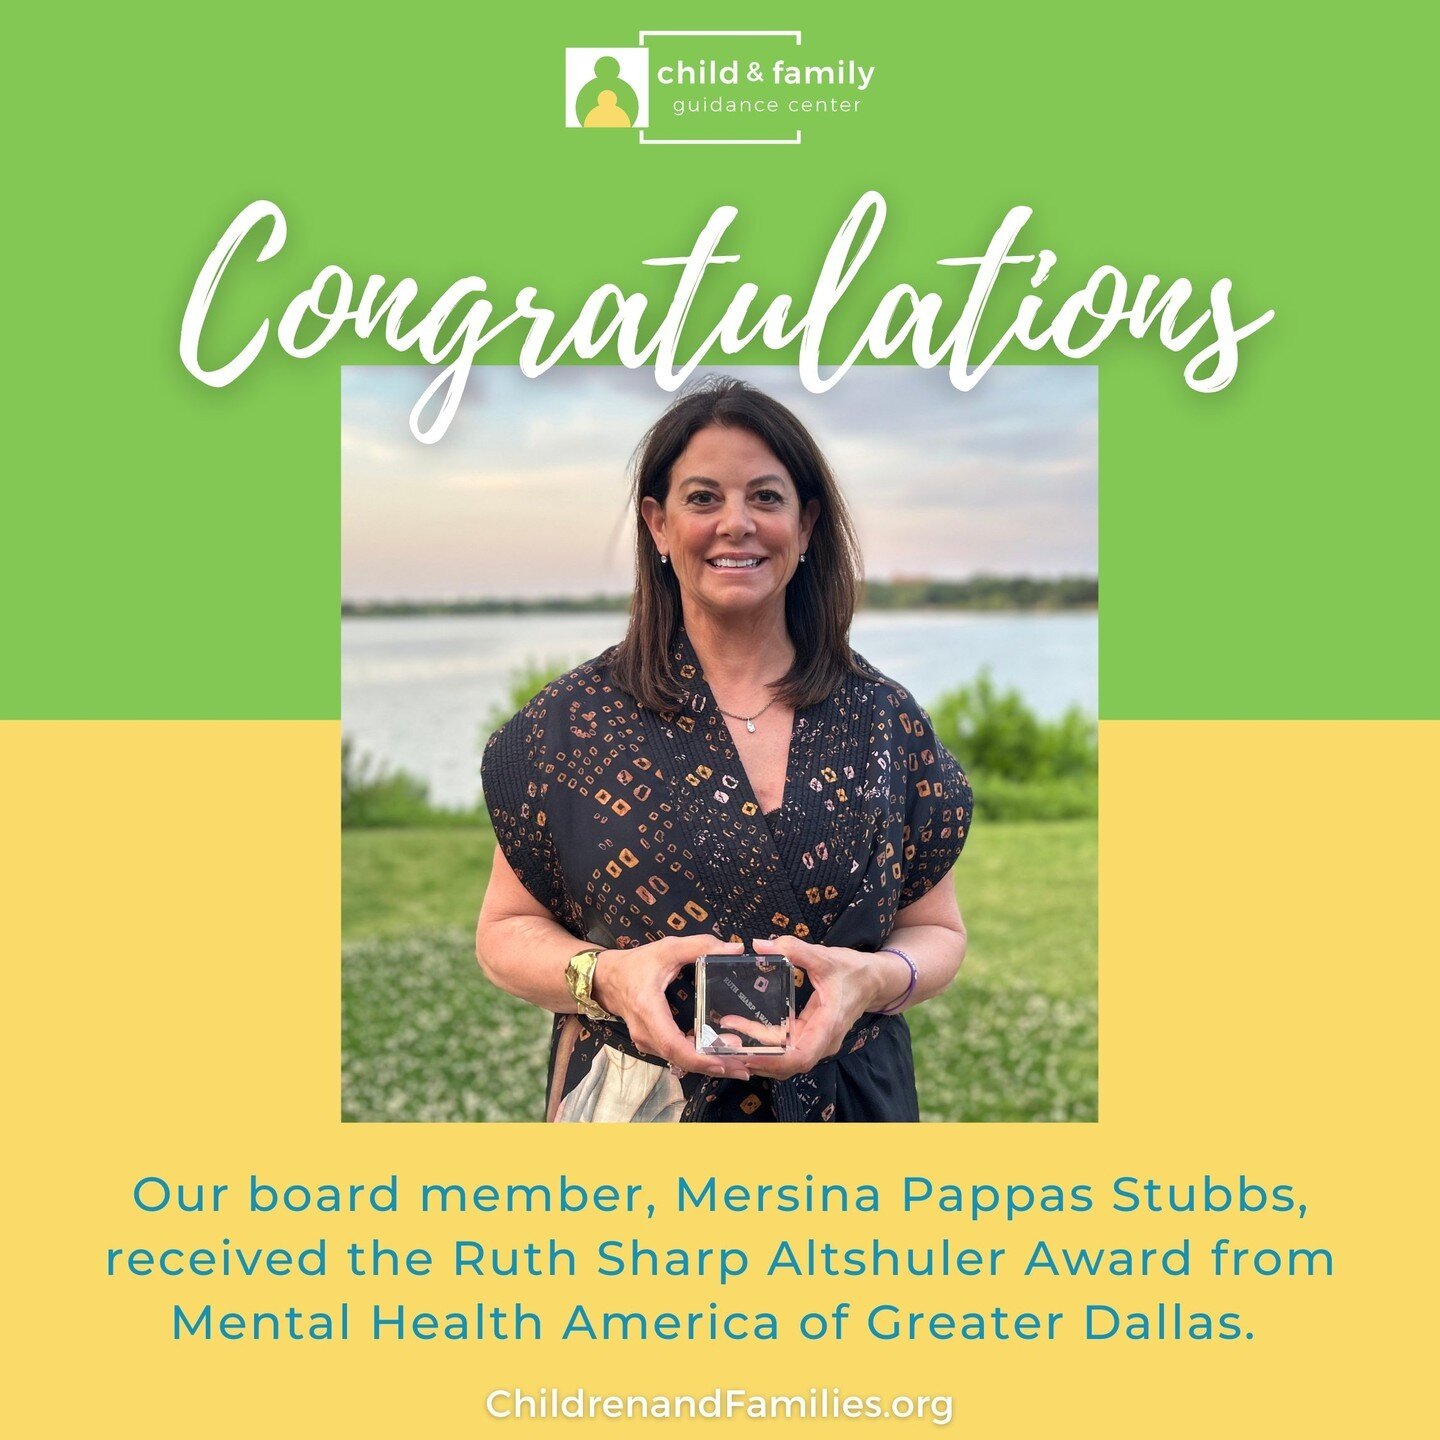 Mersina has sat on our Board of Directors for 20 years. She has raised tens of thousands of dollars for our agency, making our mission a reality. Mersina has been vocal about mental health, working passionately to break the stigma. Her dedication to 